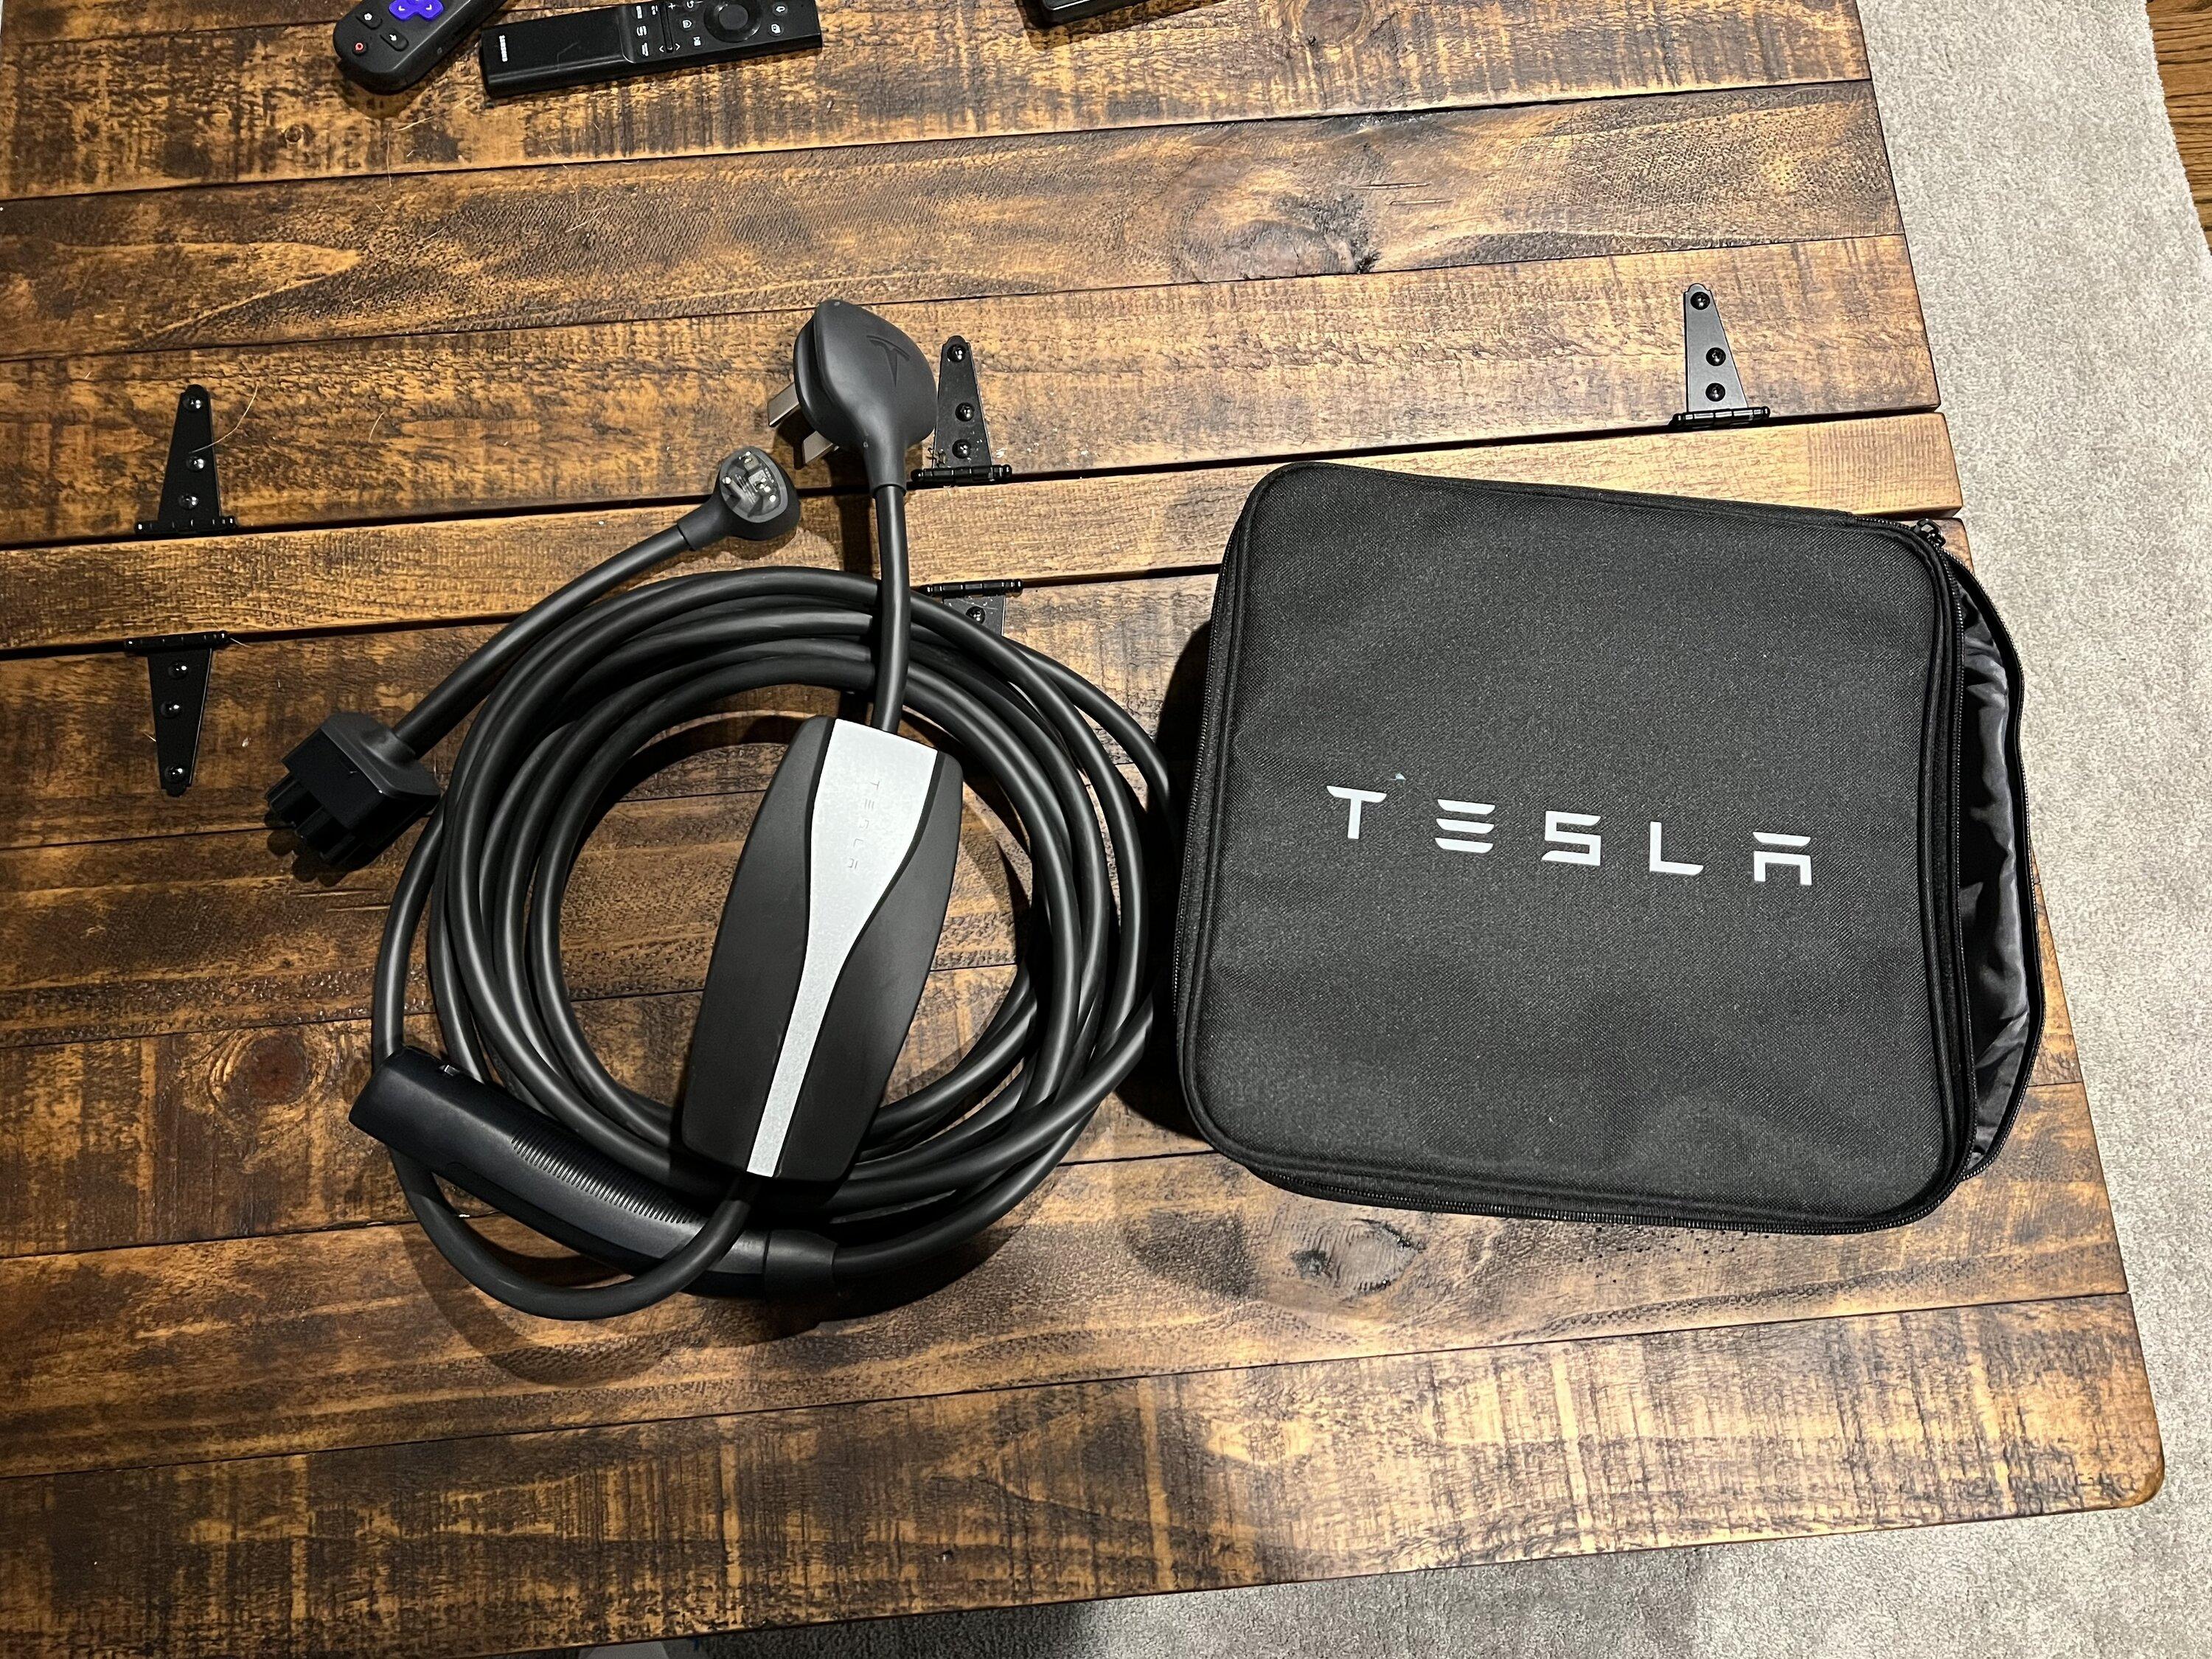 Ford F-150 Lightning Tesla mobile charger and minitap plus 80amp charger 33AB0626-0BFA-450A-A819-C2E0AD3CFF54